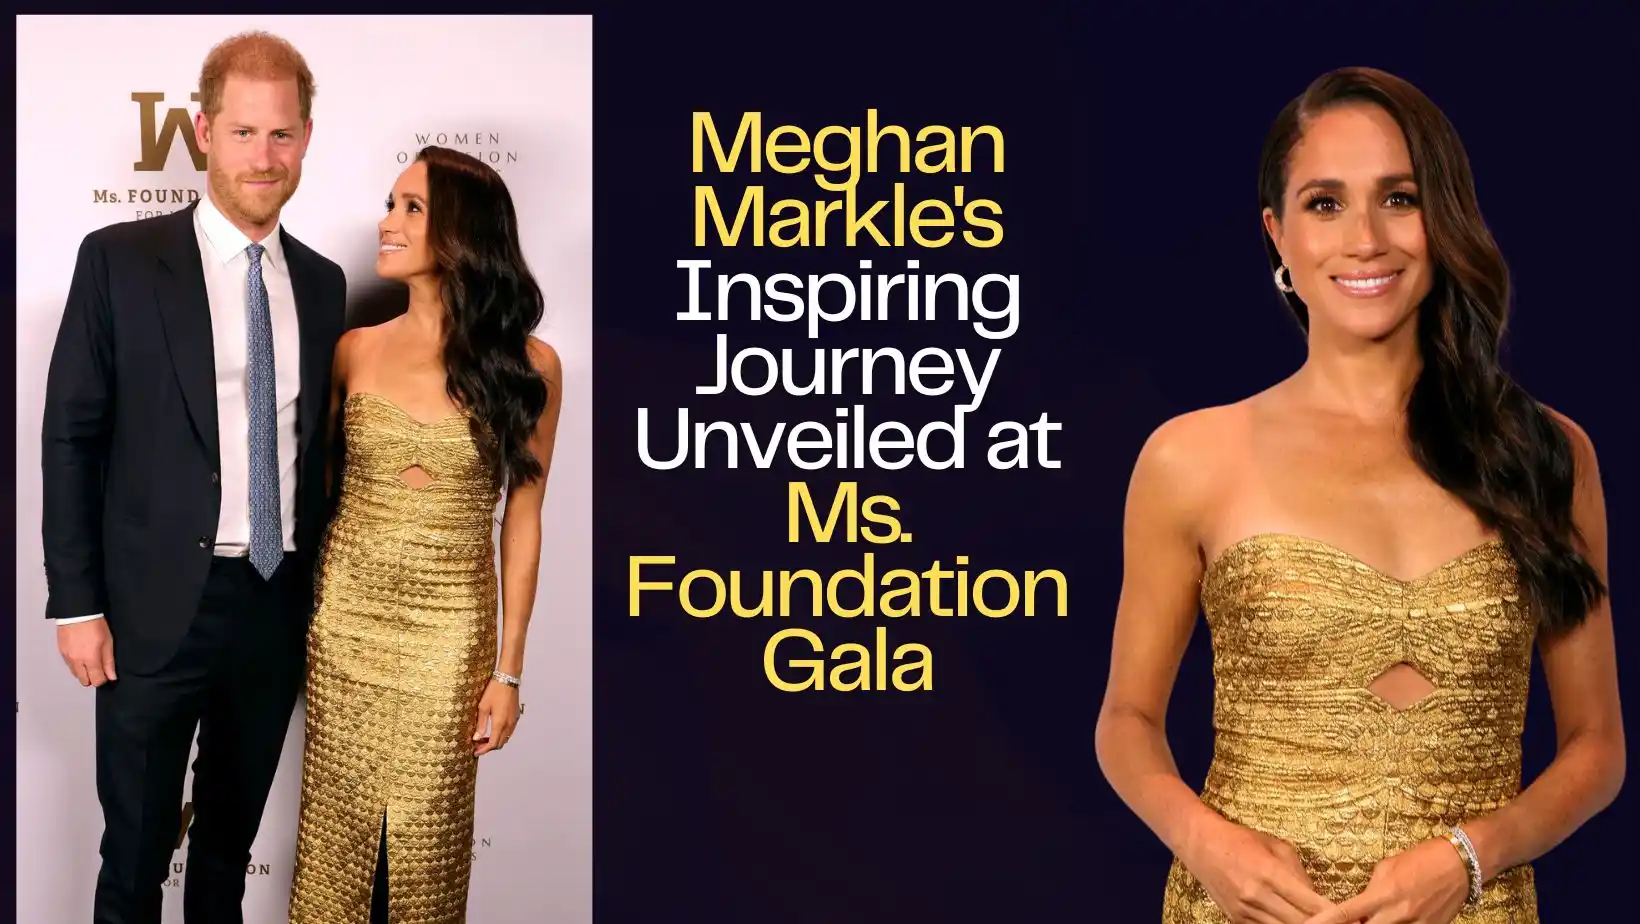 Meghan Markle's Inspiring Journey Unveiled at Ms. Foundation Gala